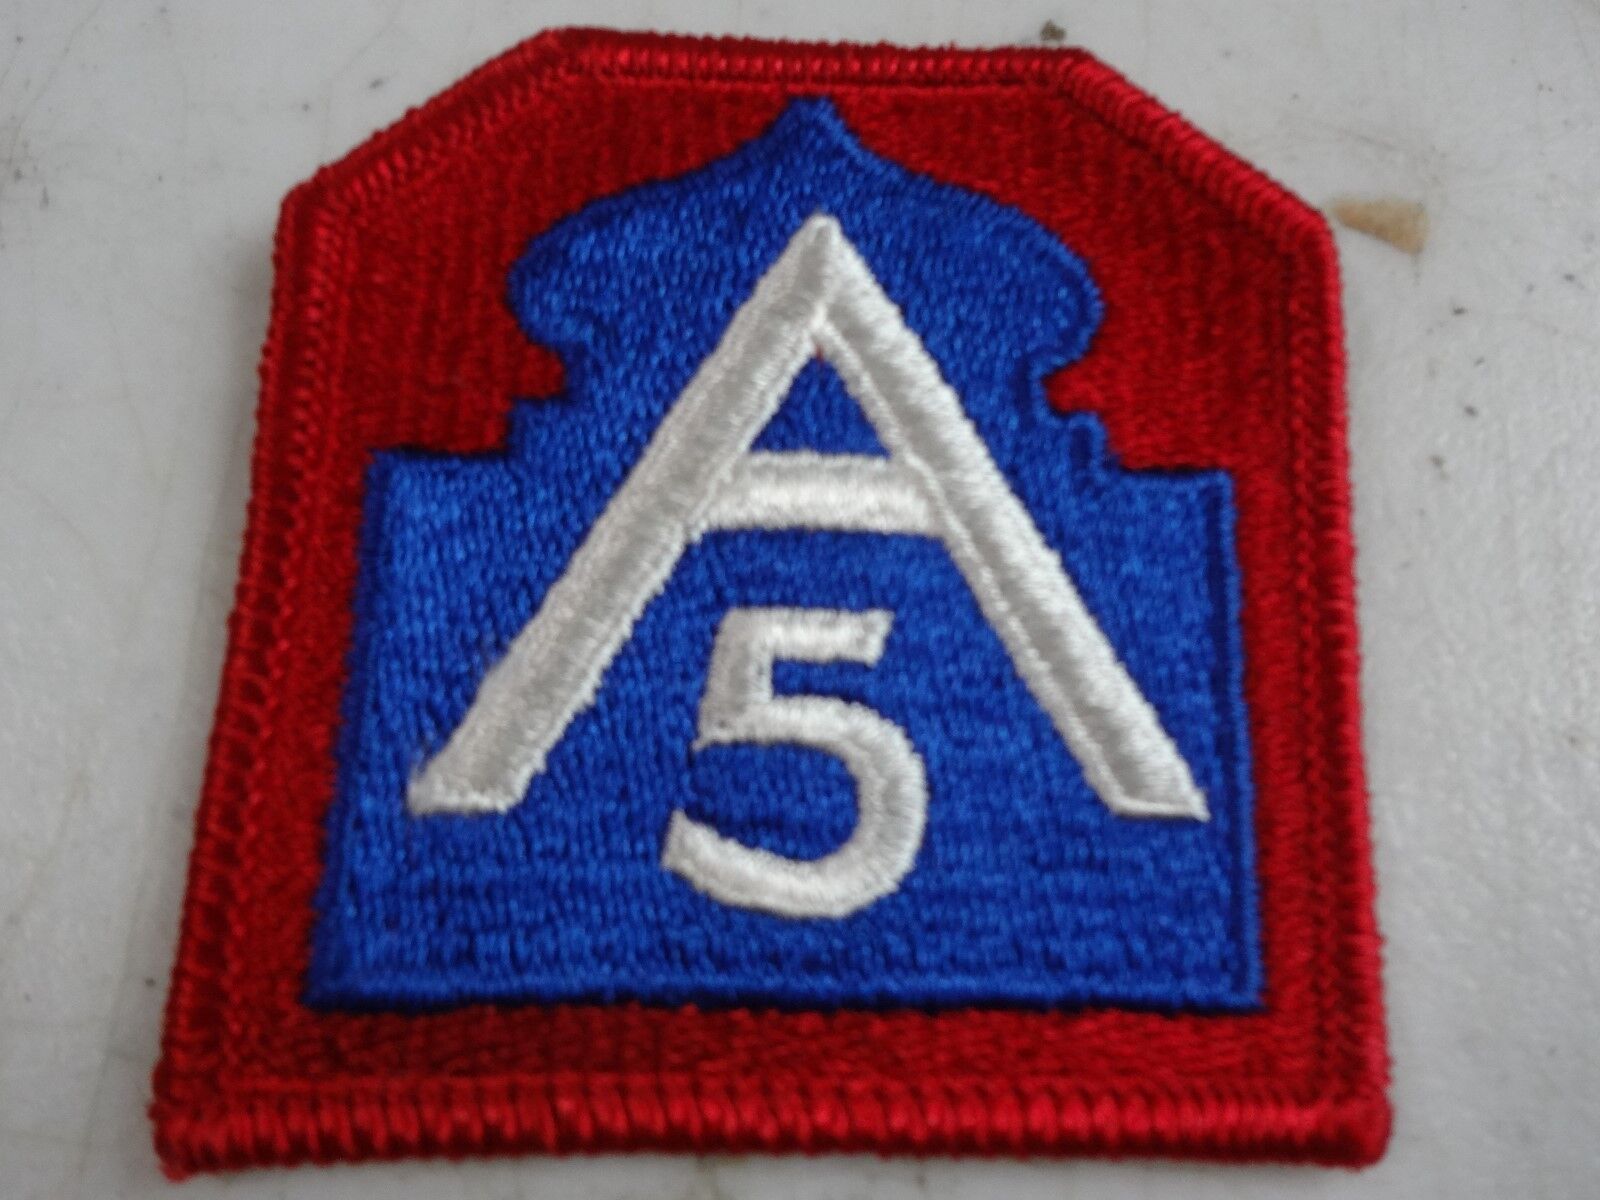 WW2 US 5th Army A-5 Division Shoulder Unit Military Uniform Patch Orig. WWII